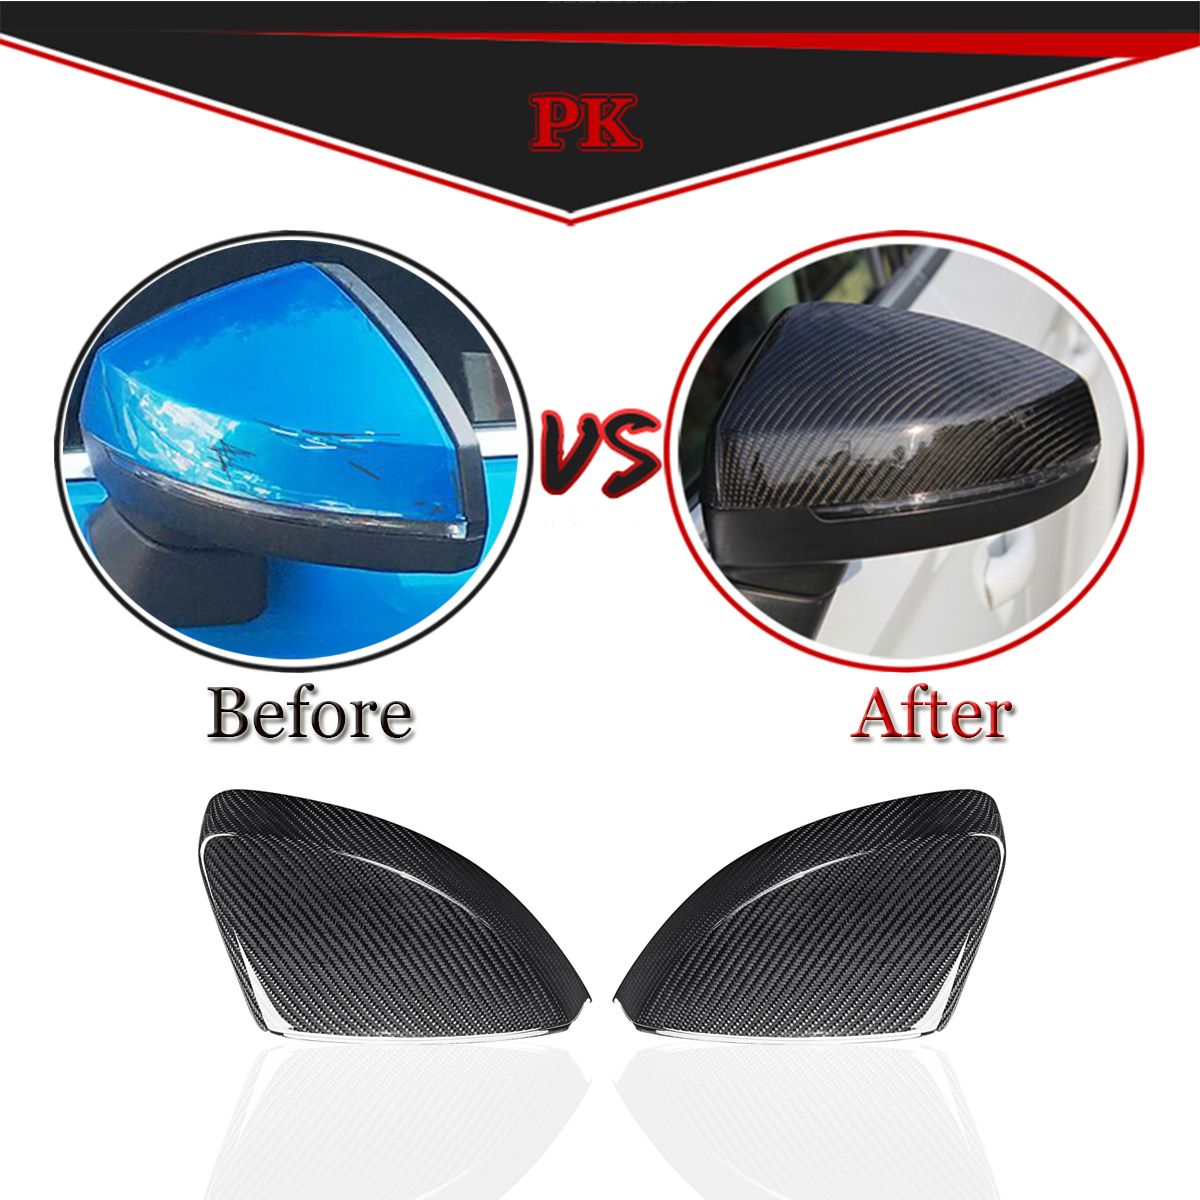 Real-Carbon-Fiber-Side-Car-Mirror-Replacement-Caps-Cover-for-AUDI-A3-S3-RS3-1299069